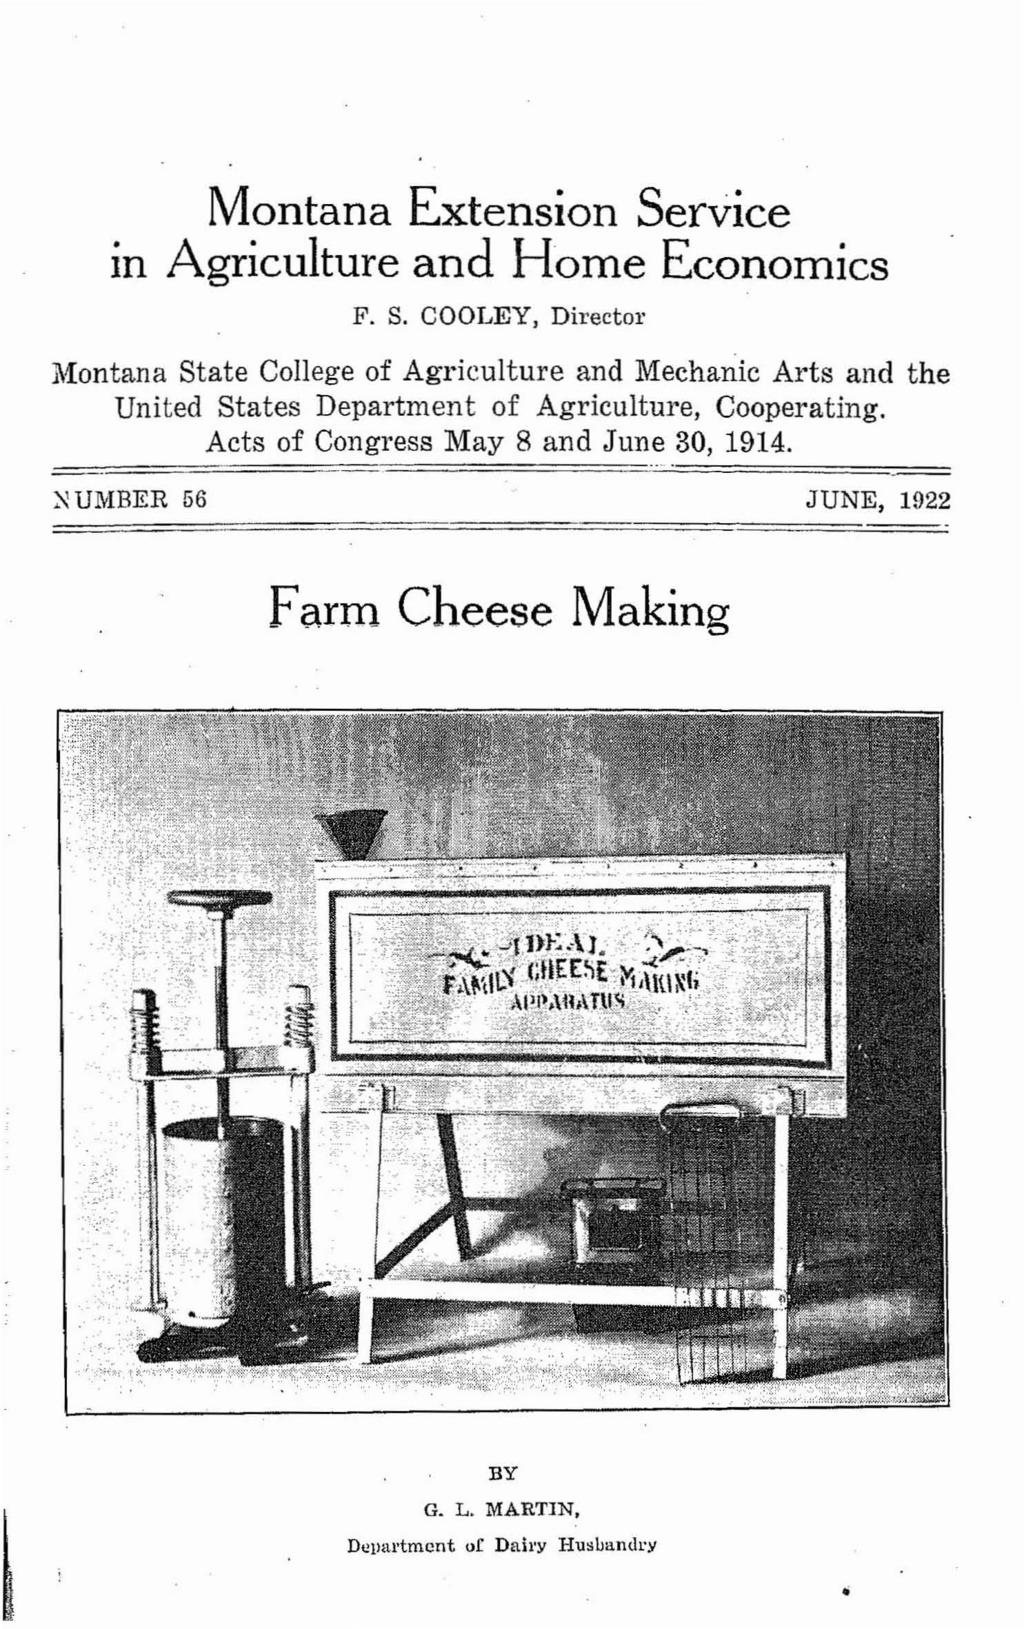 Montana Extension Service In Agriculture and Home Economics F. S. COOLEY, Director Montana State College of Agriculture and Mechanic Arts and the United States Department of Agriculture, Cooperating.